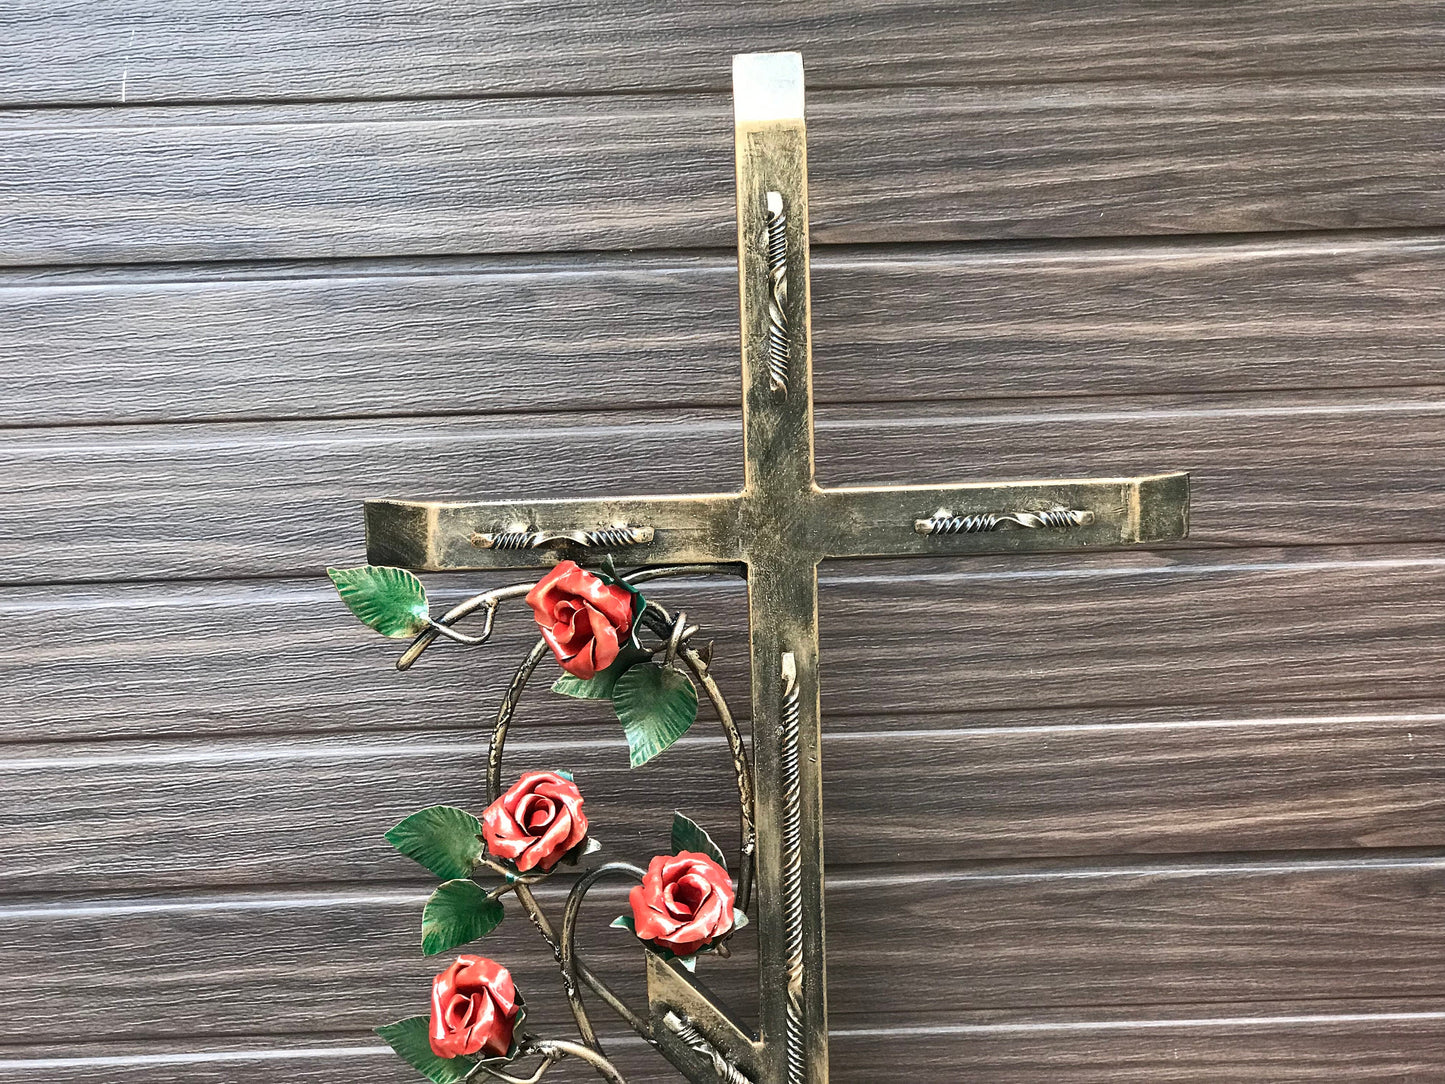 Memorial cross, cross, sympathy gift, remembrance gift, grief gift, bereavement gift, loss of loved one,in memory of gift,sympathy gift idea